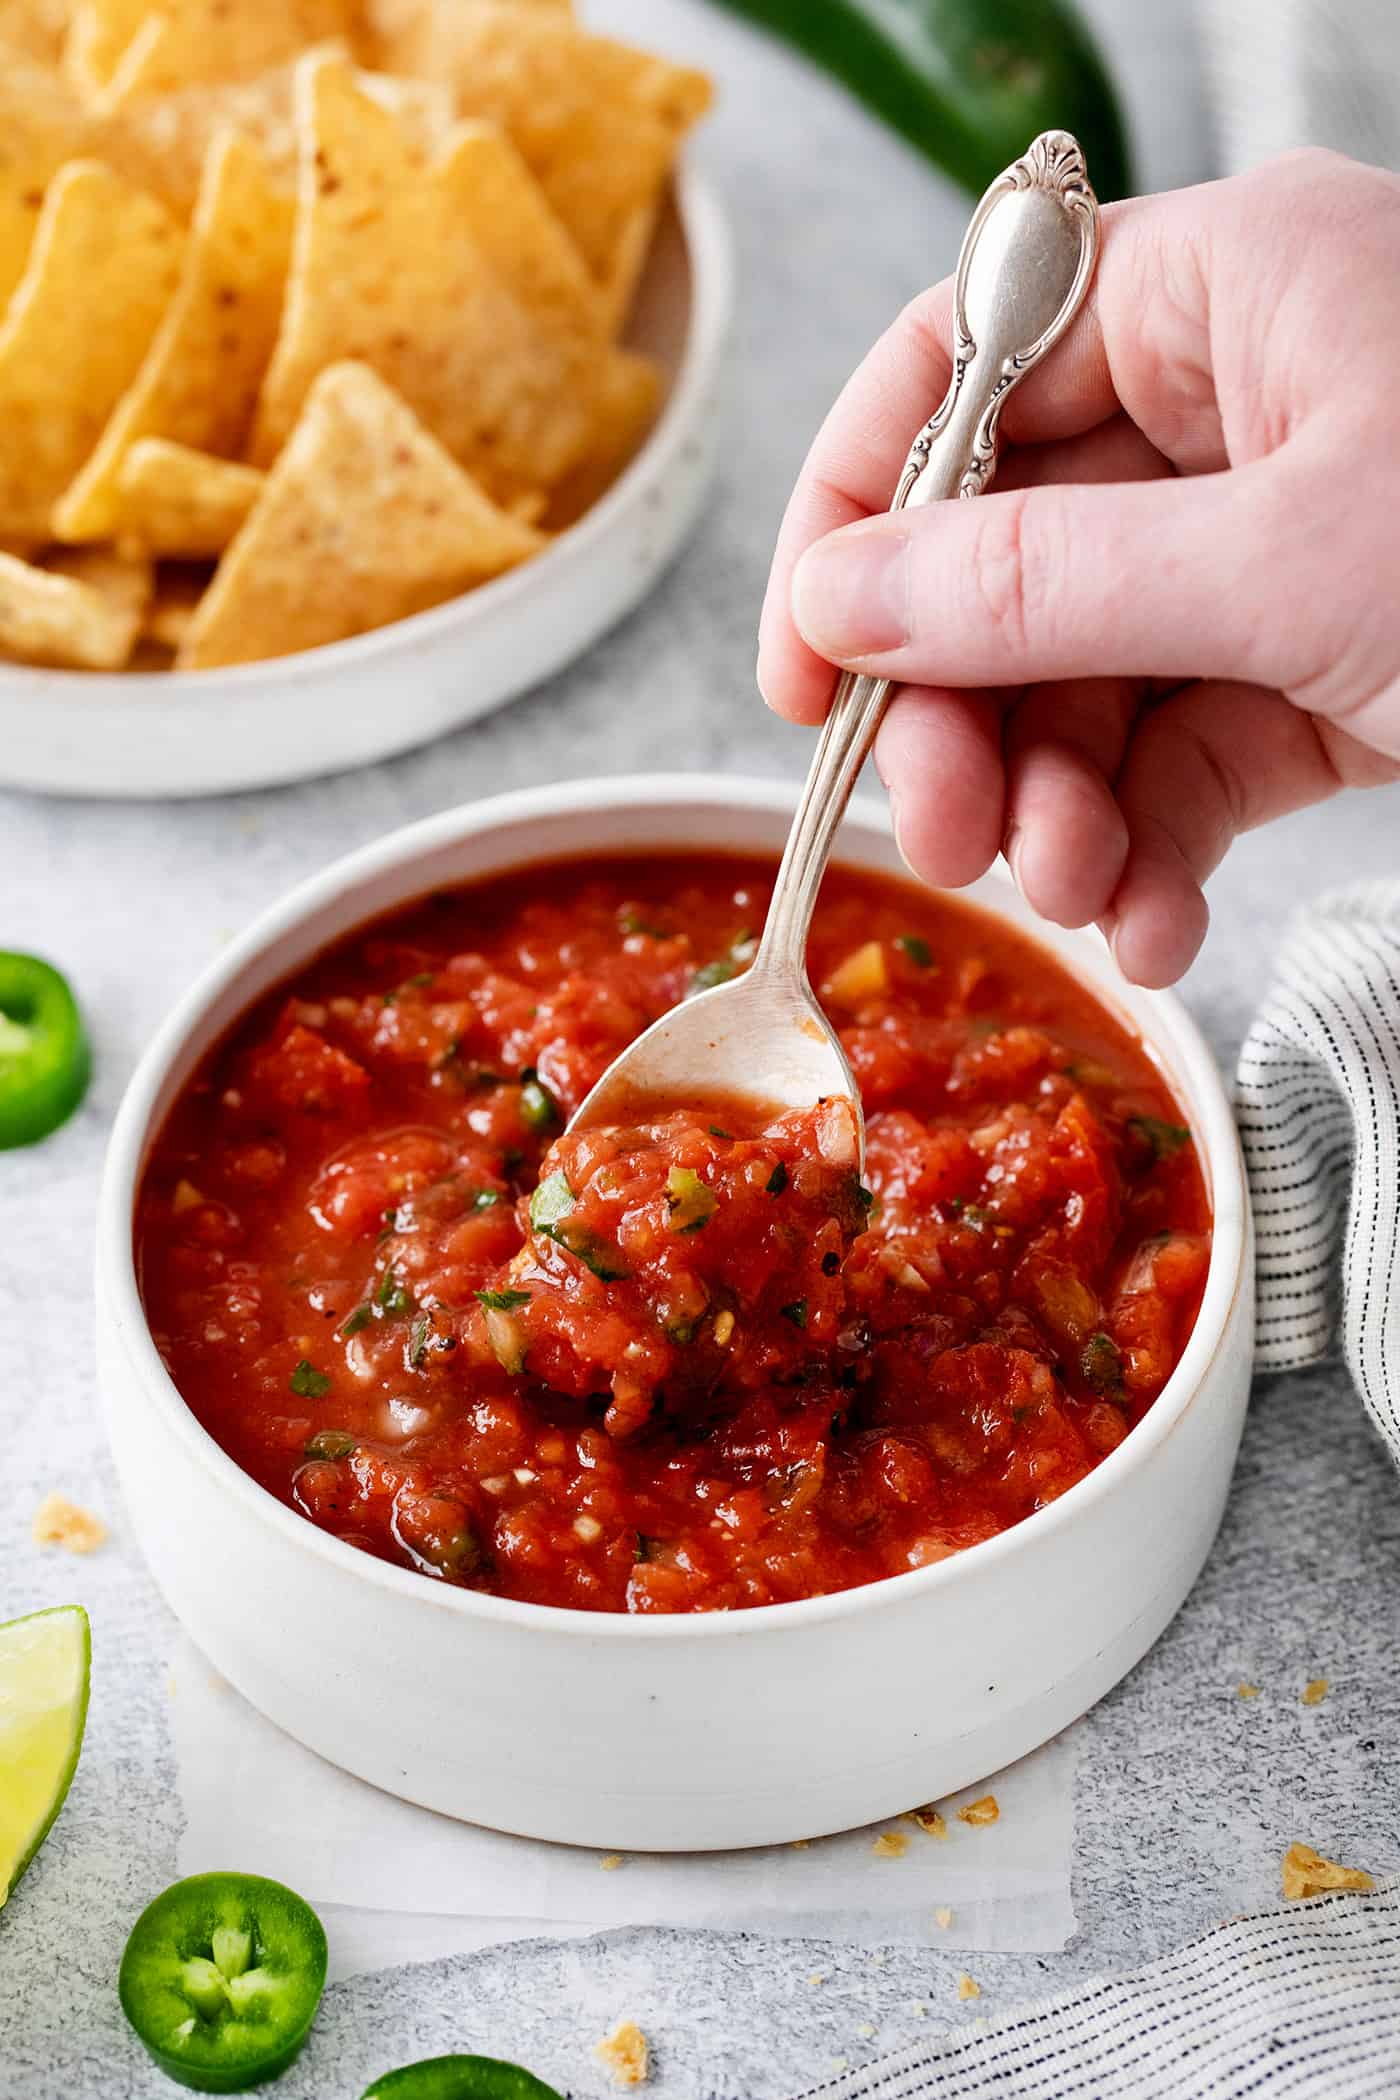 A hand holding a spoon in a bowl of restaurant style salsa